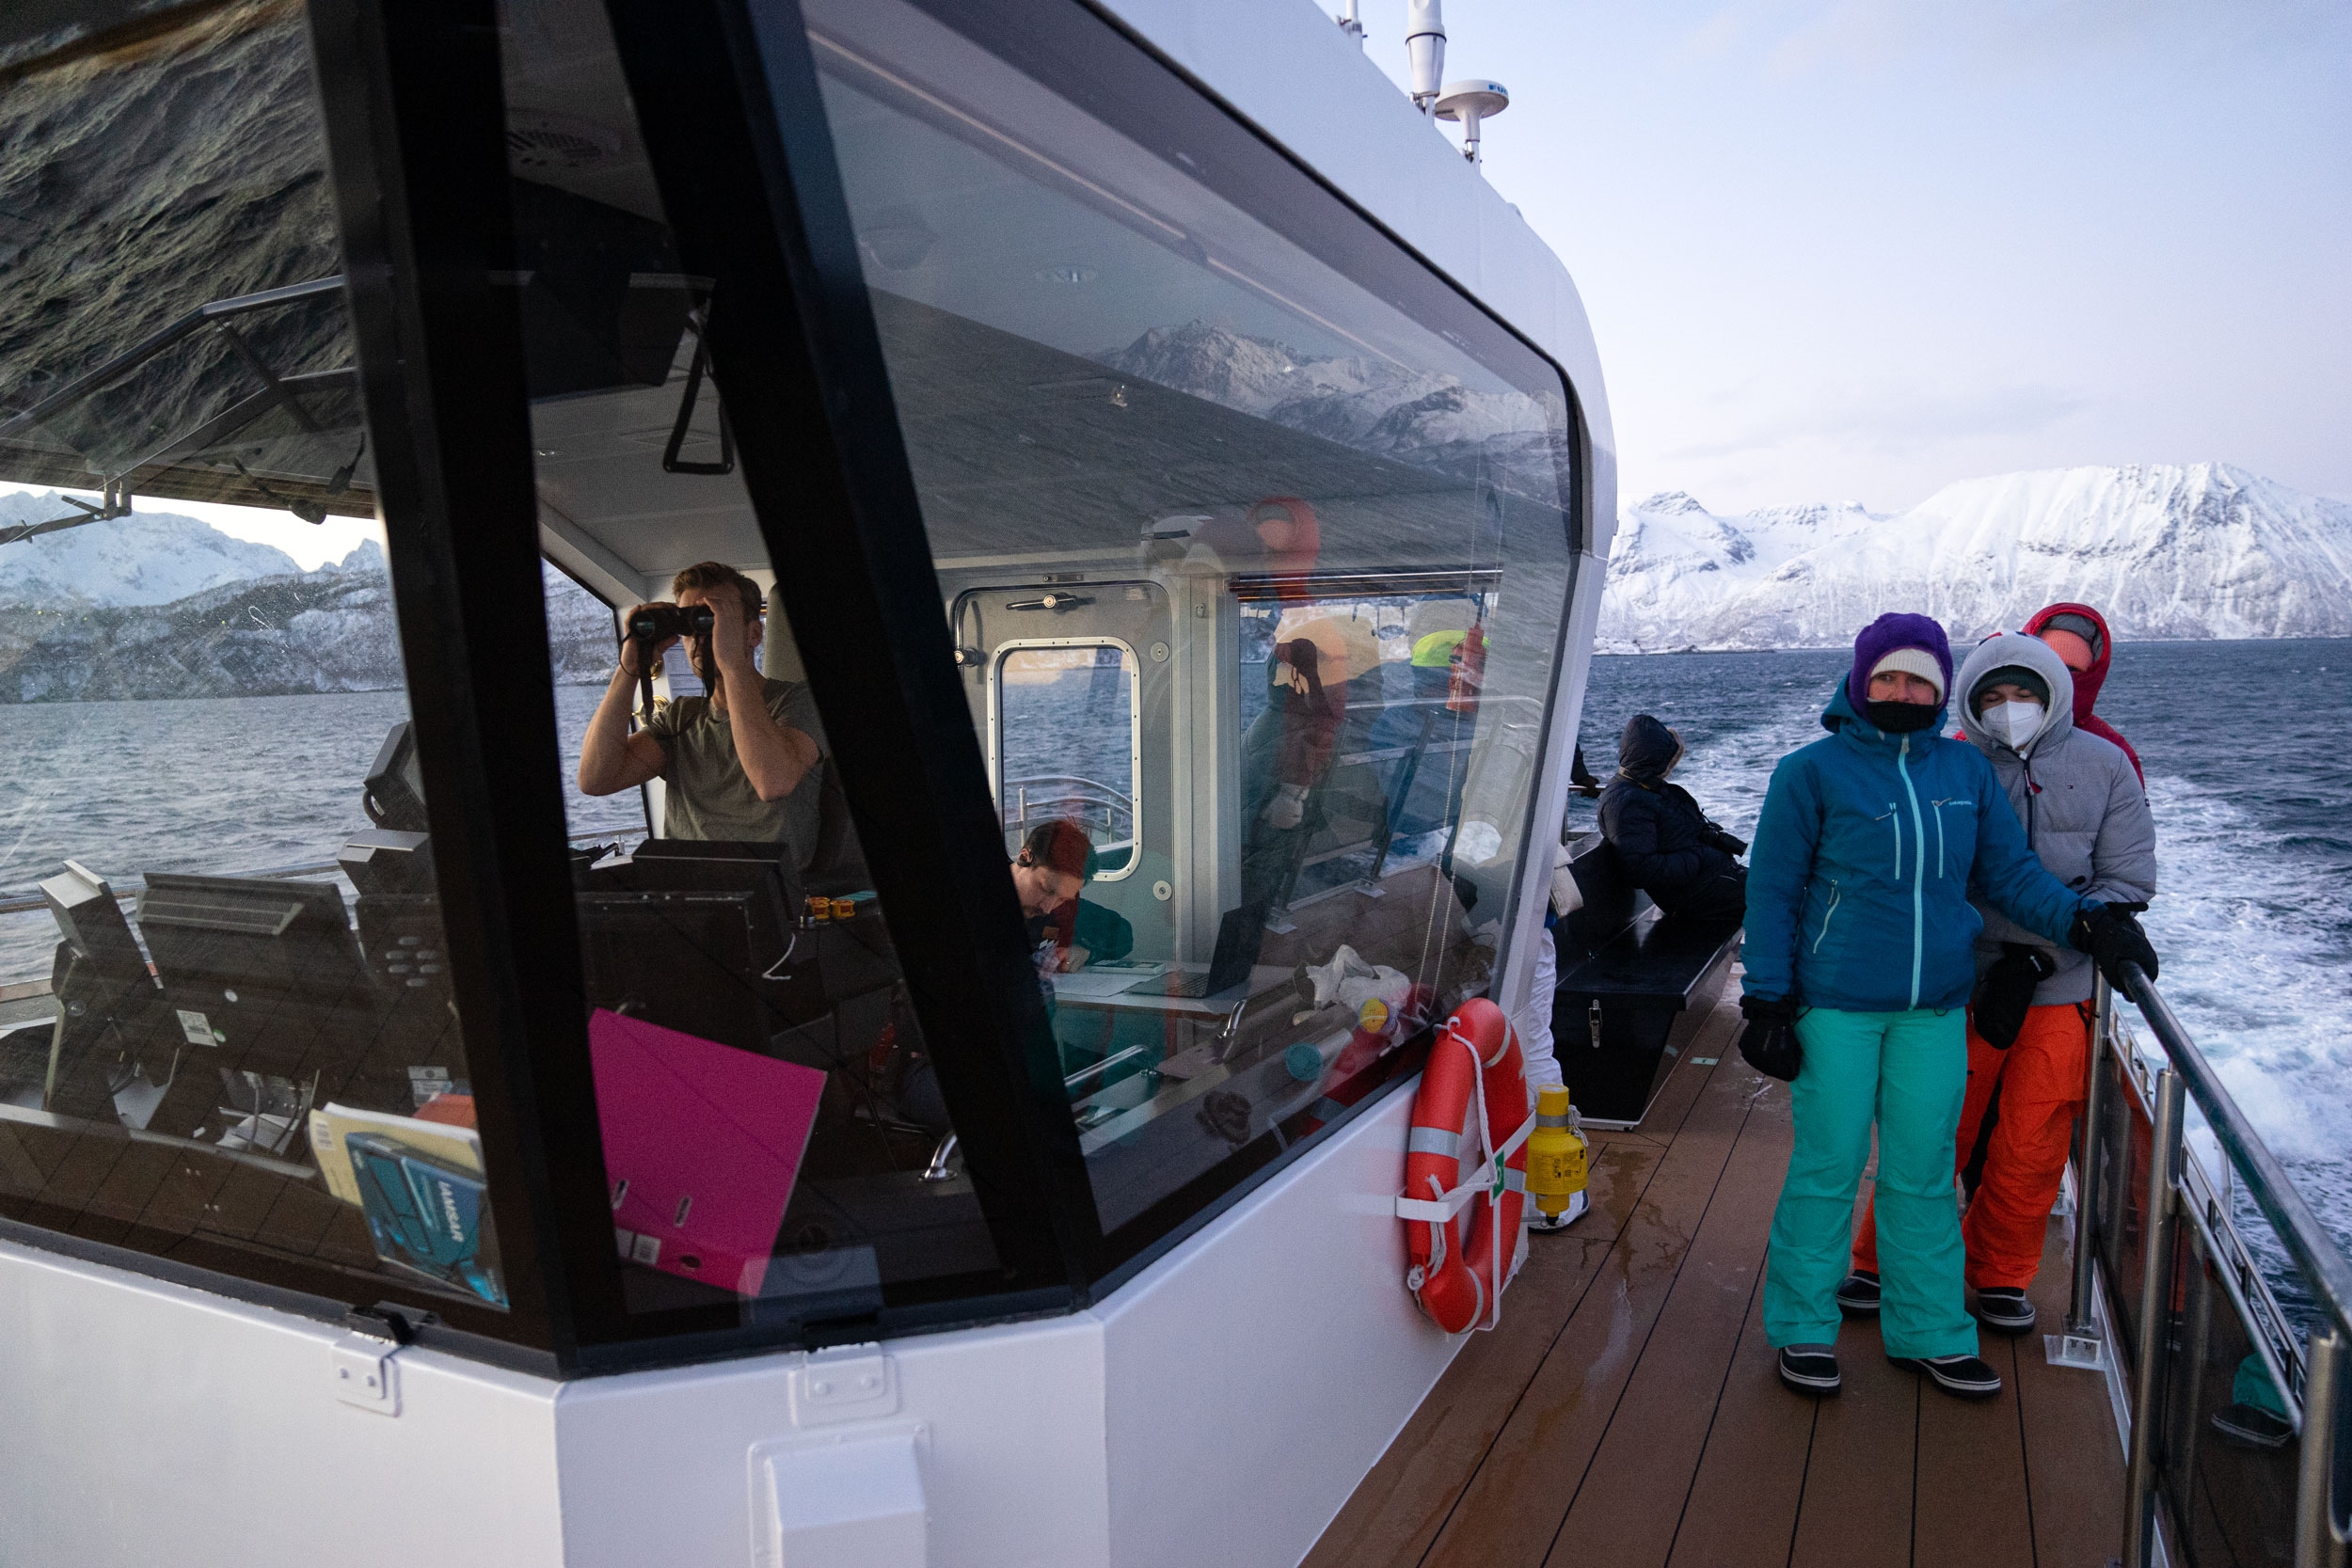 People in snowsuits stand on the deck of a boat that is moving through cold, icy ocean waters.